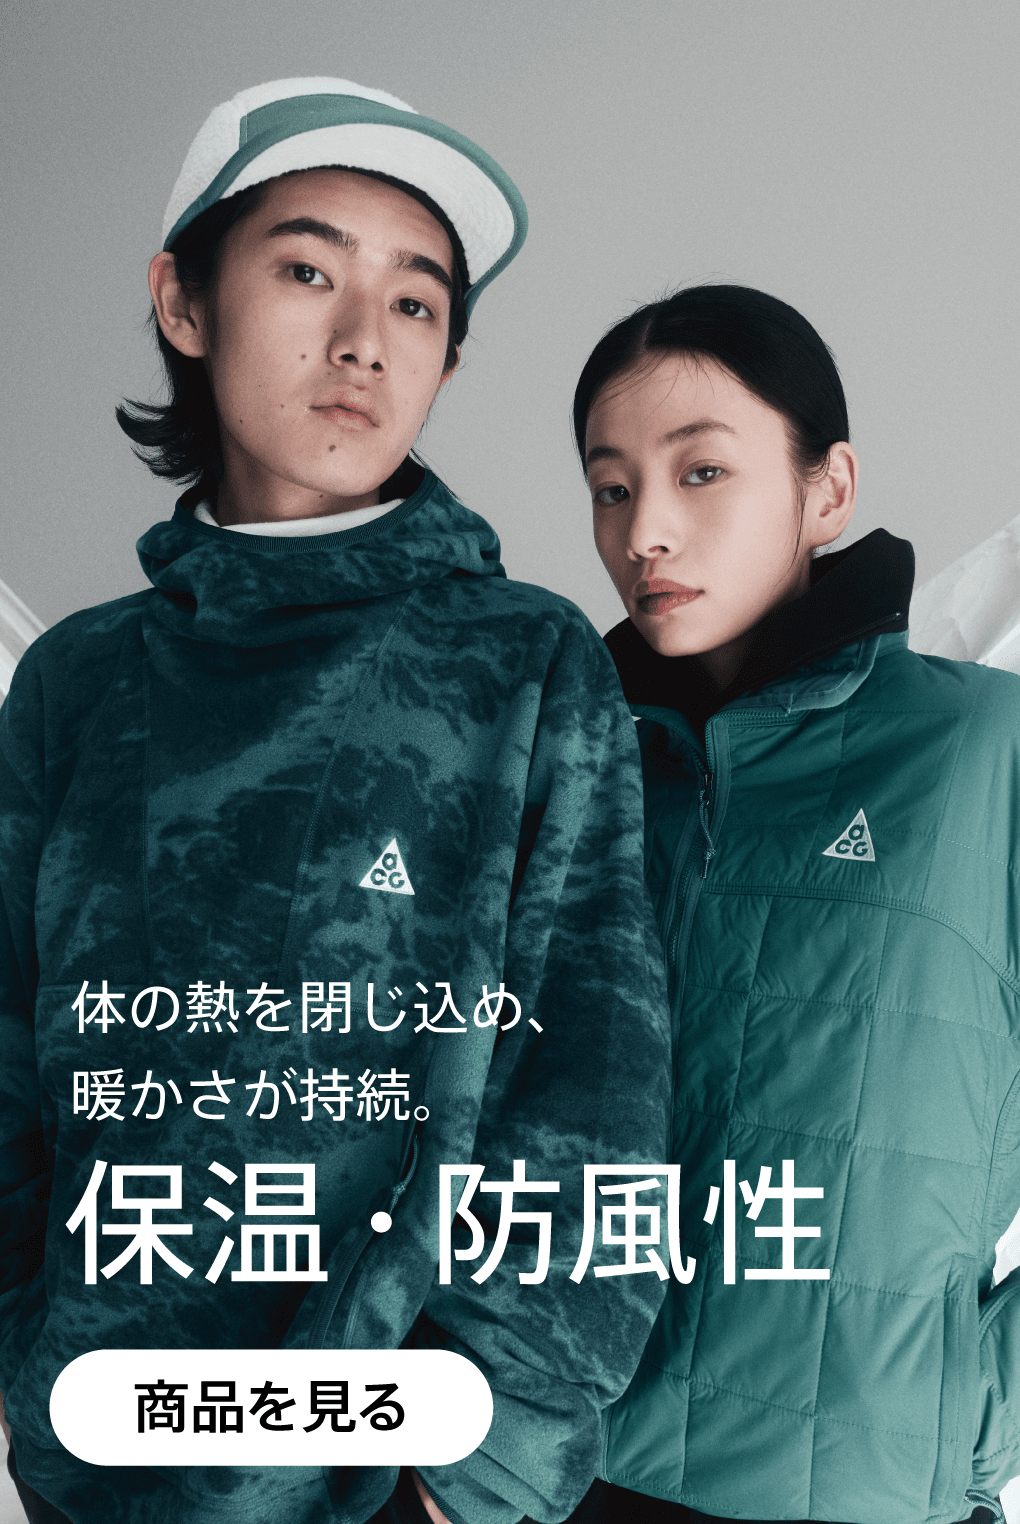 NIKE公式】 Therma-FIT アパレル【ナイキ公式通販】